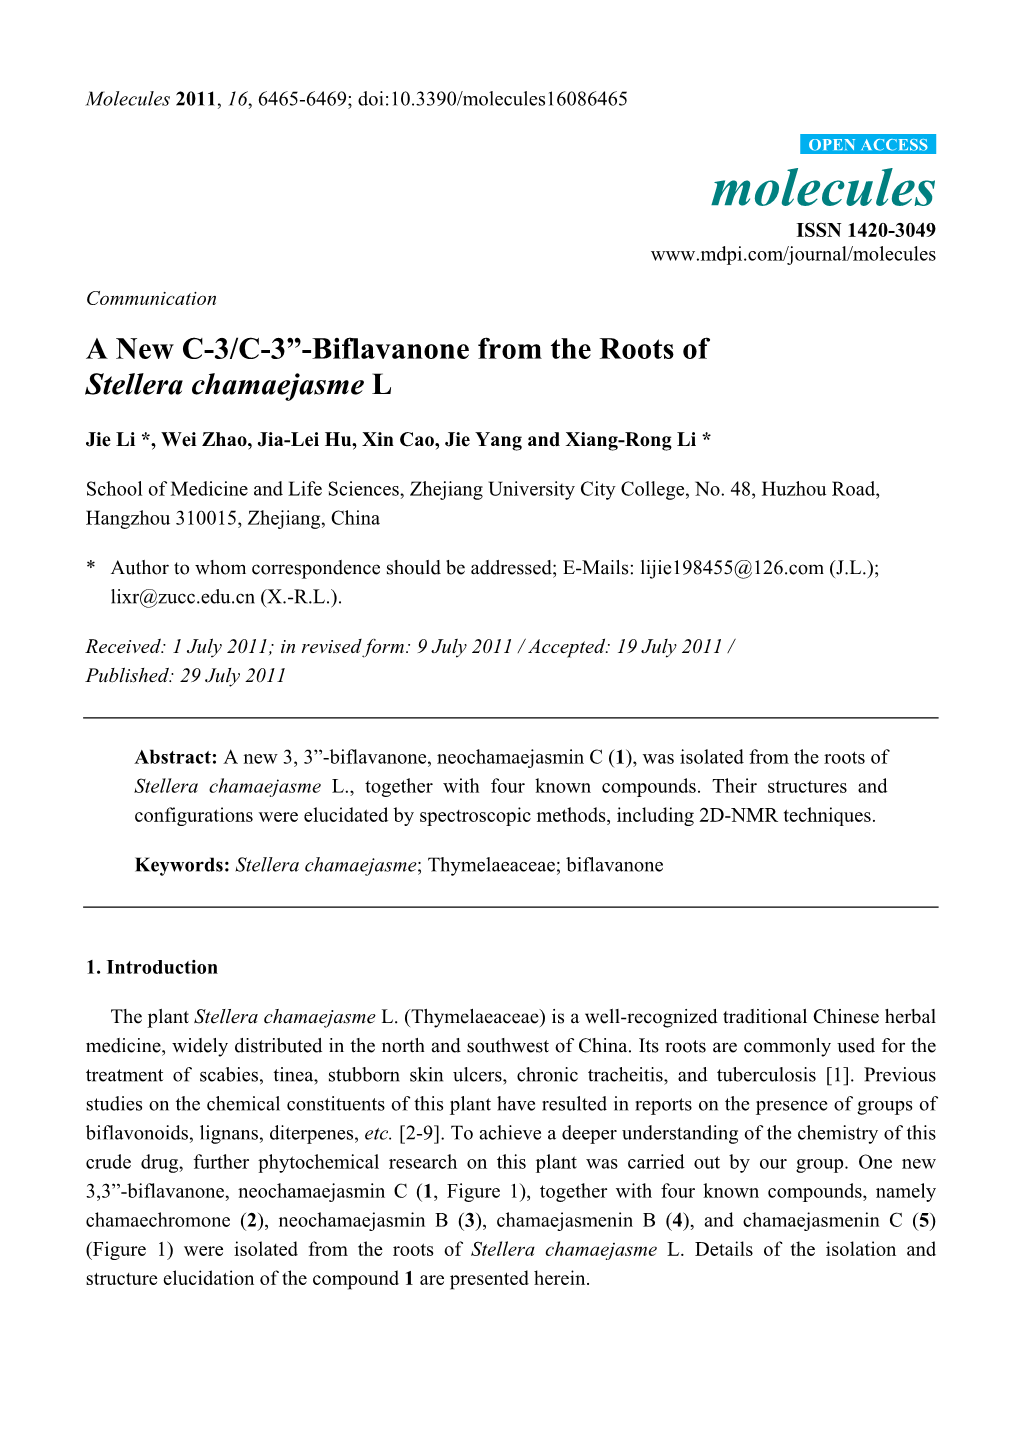 A New C-3/C-3”-Biflavanone from the Roots of Stellera Chamaejasme L